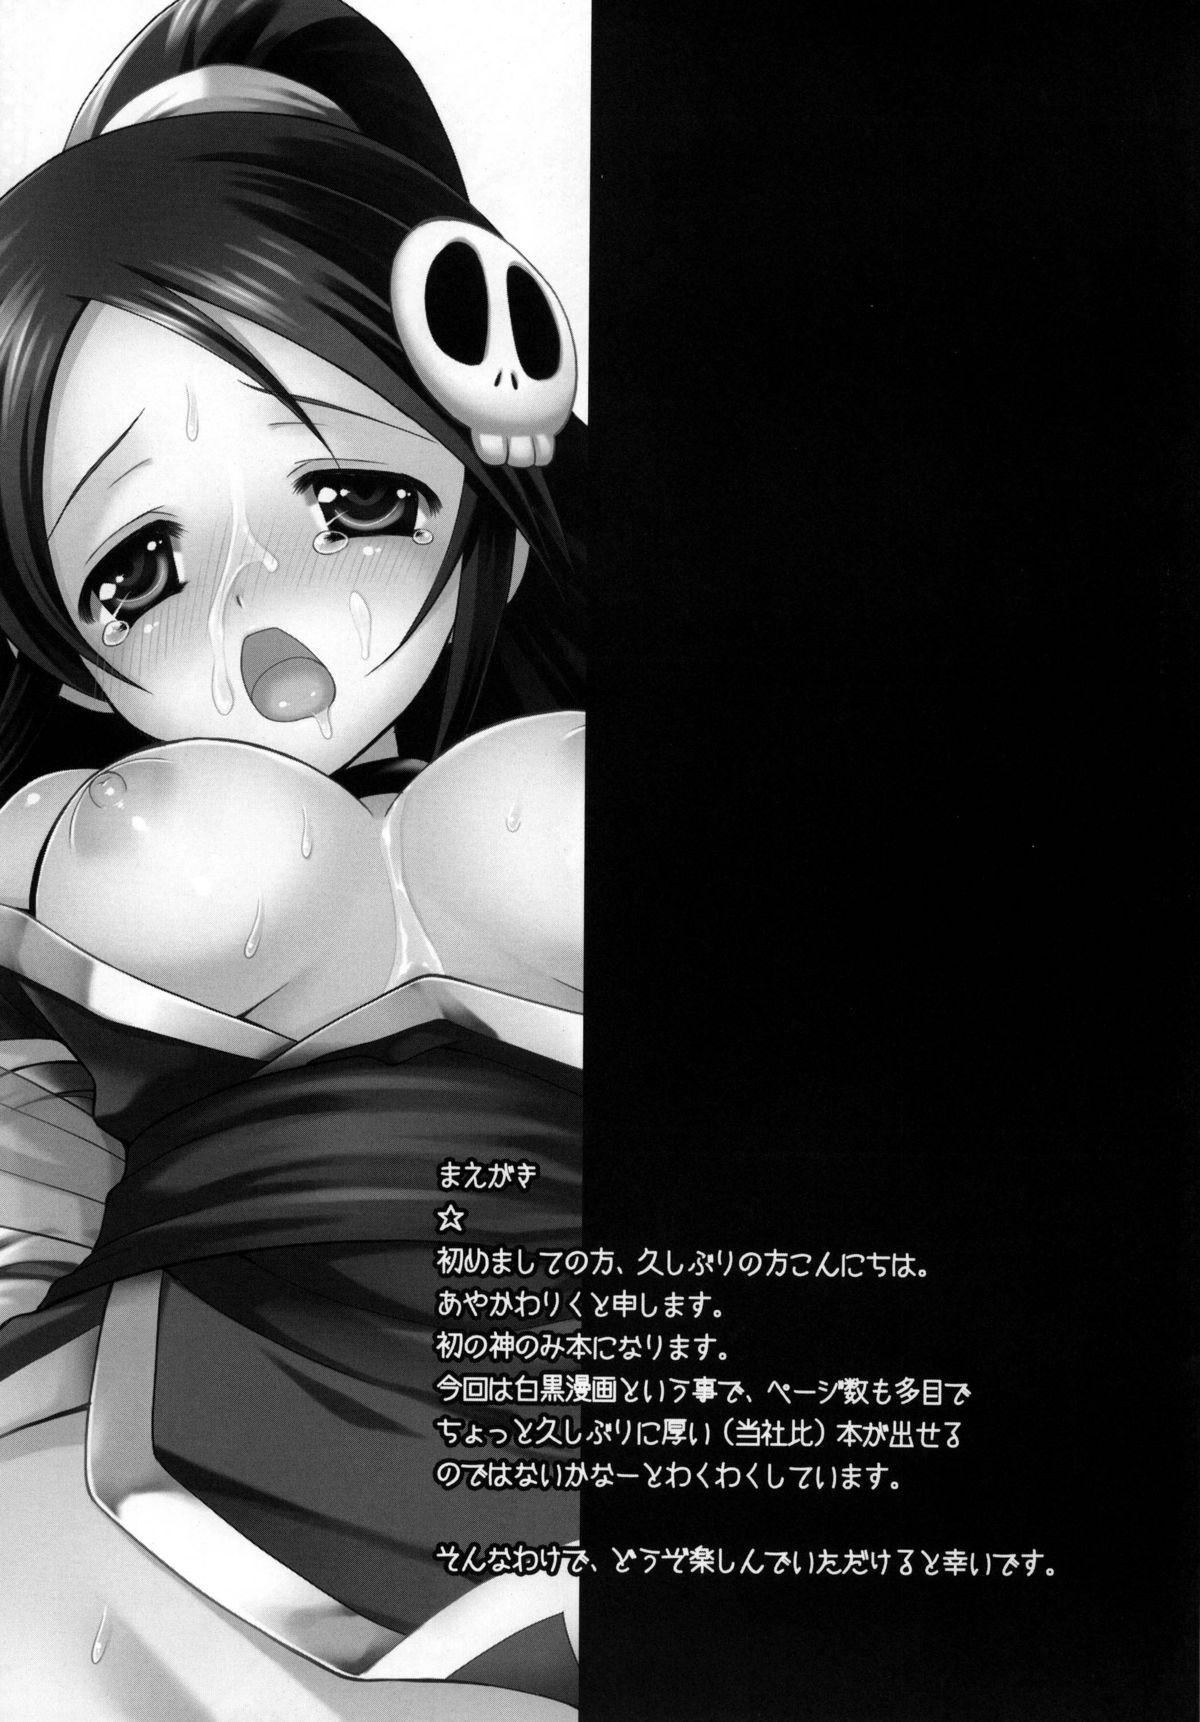 Officesex Kami Nomi zo Fullcomp - The world god only knows Sperm - Page 4